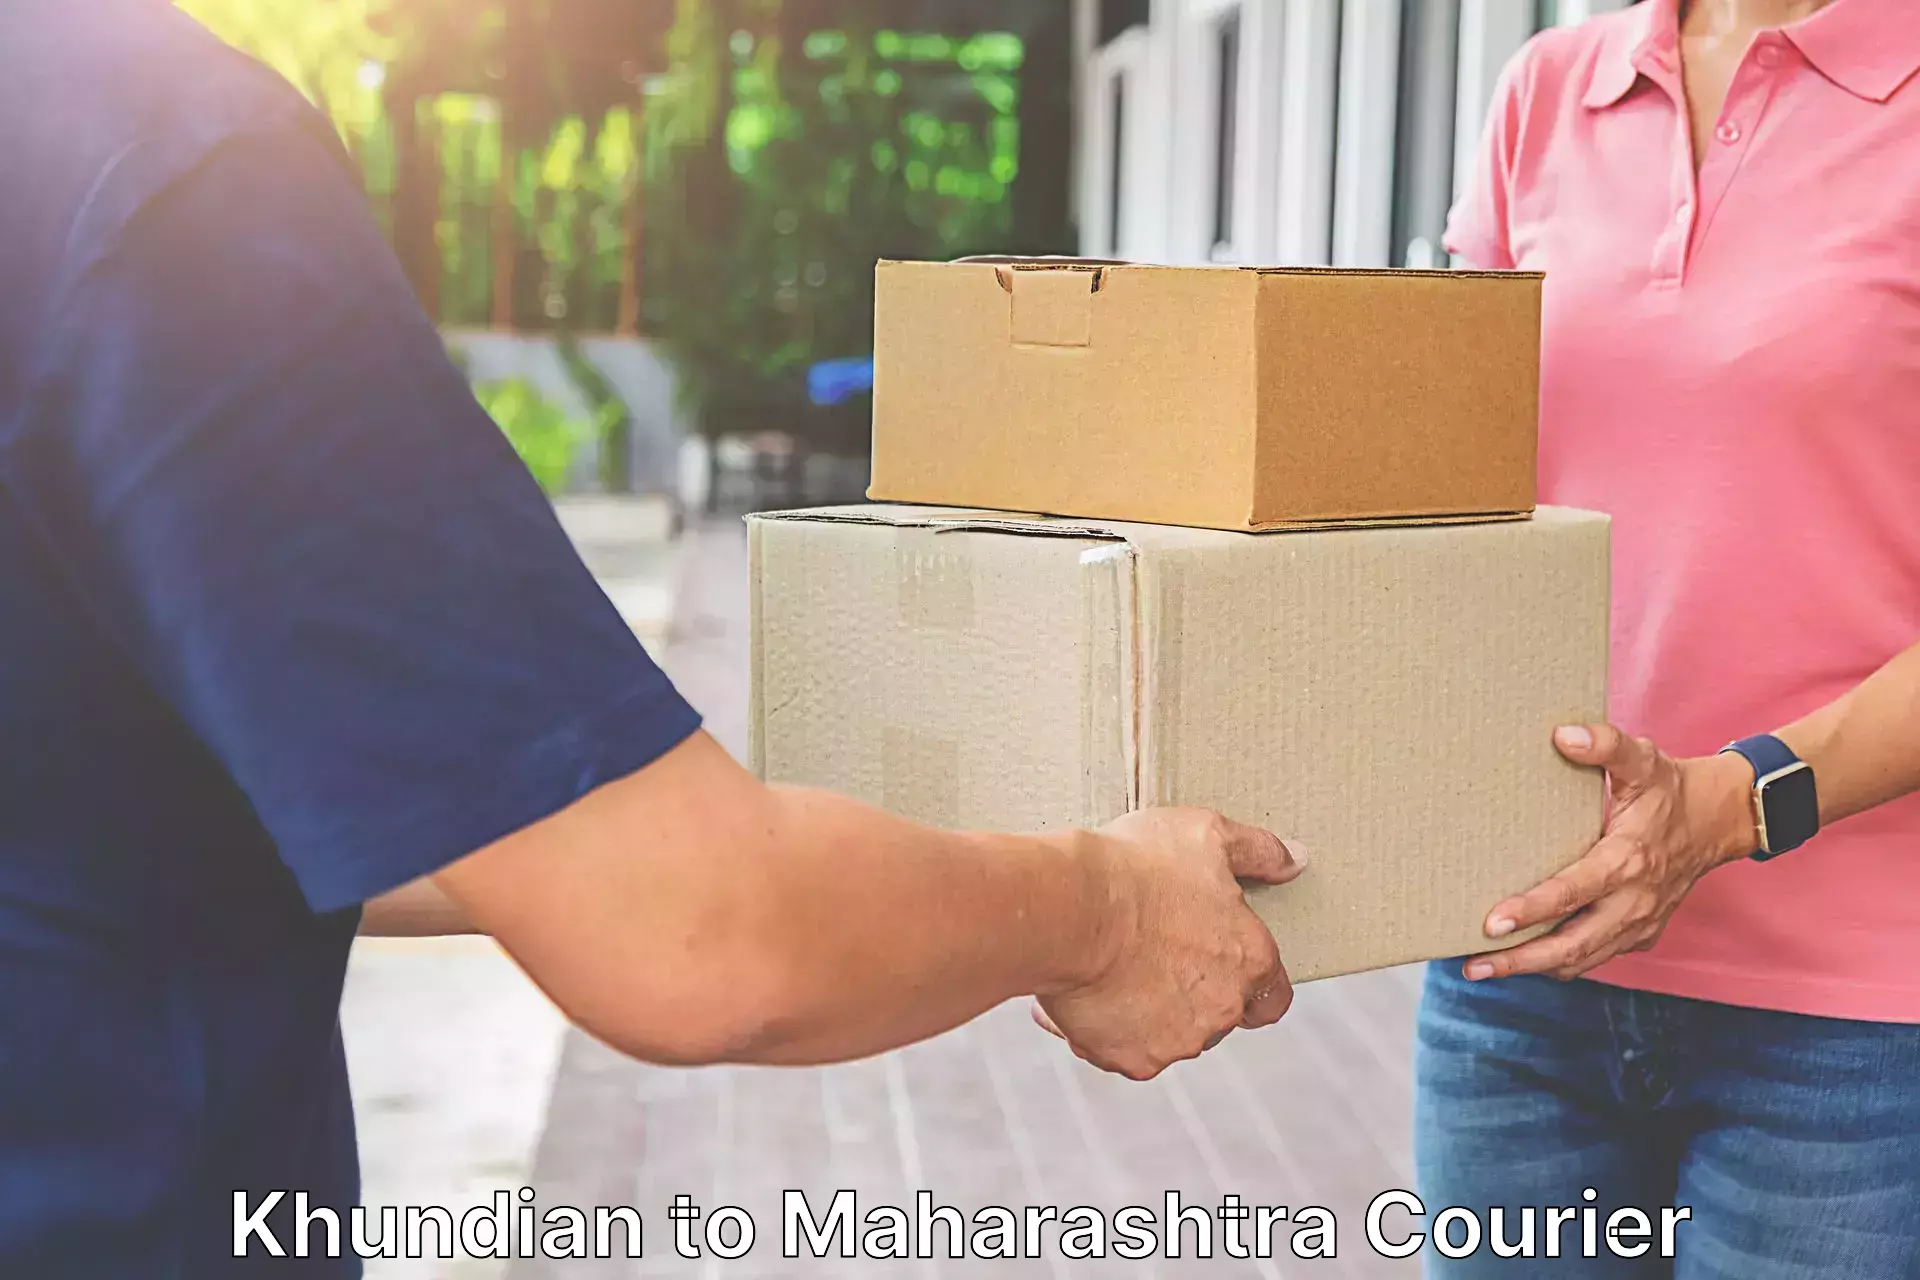 On-call courier service Khundian to Kalyan Dombivli